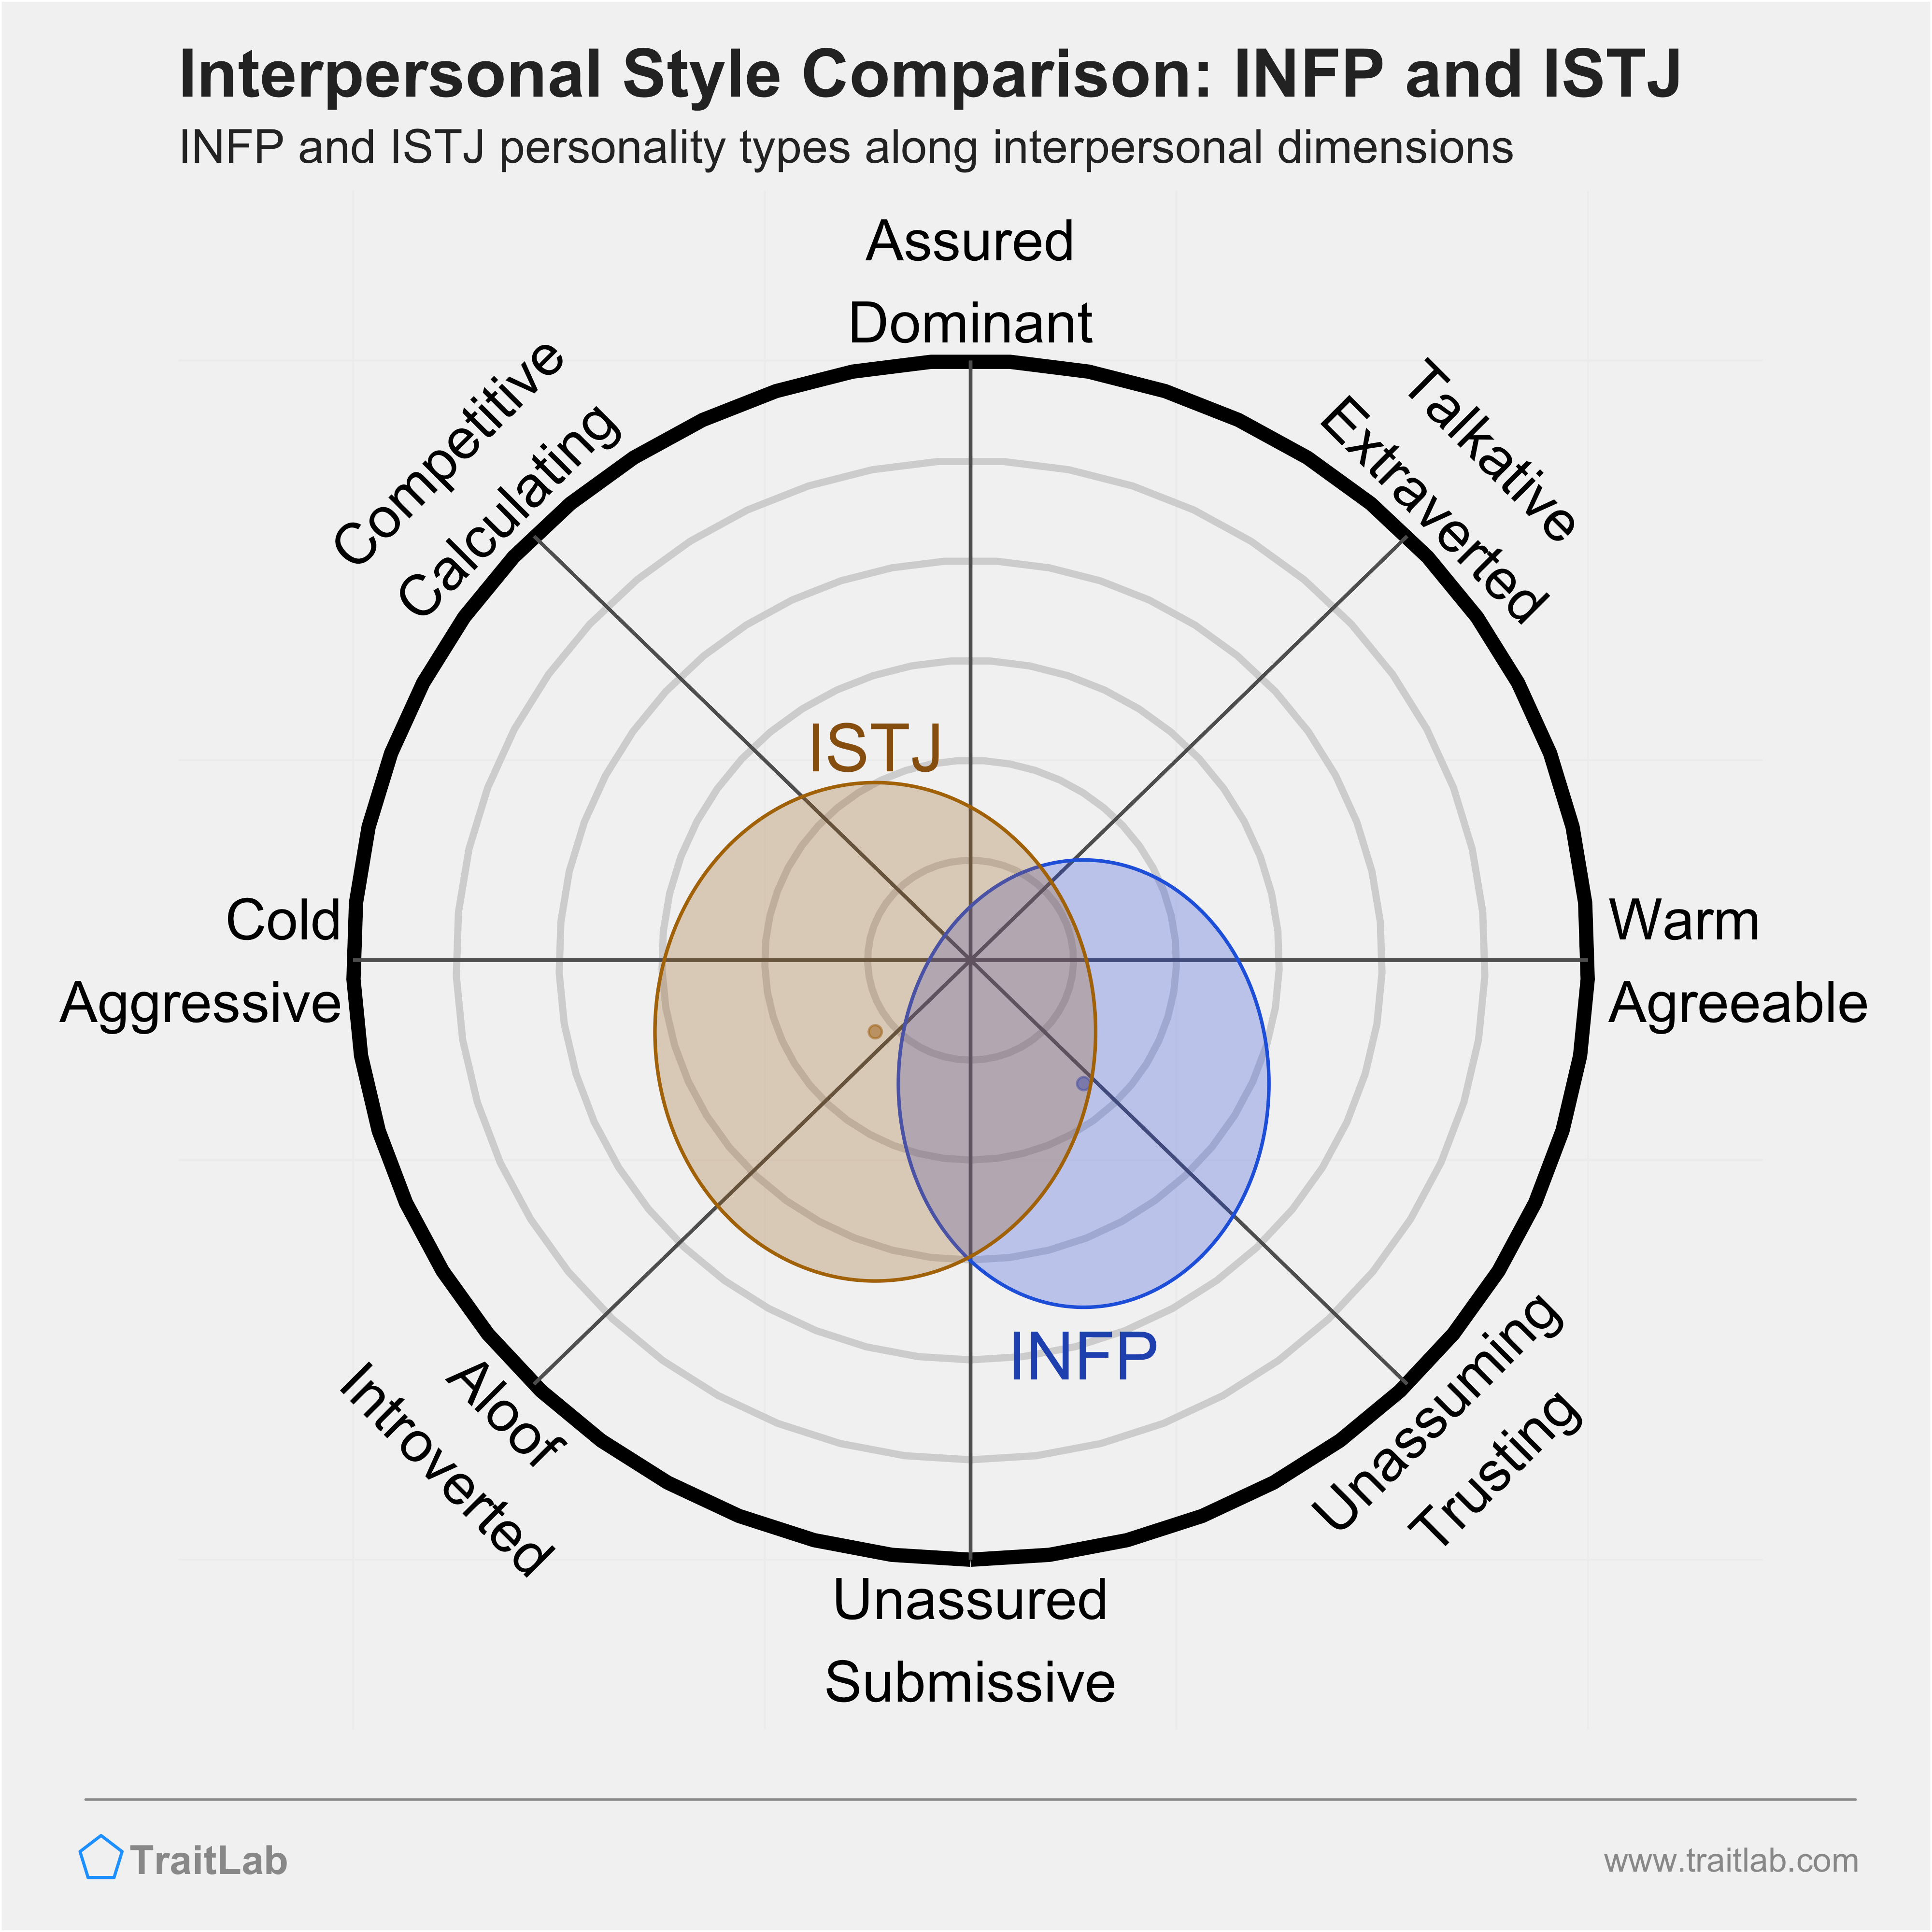 INFP and ISTJ comparison across interpersonal dimensions